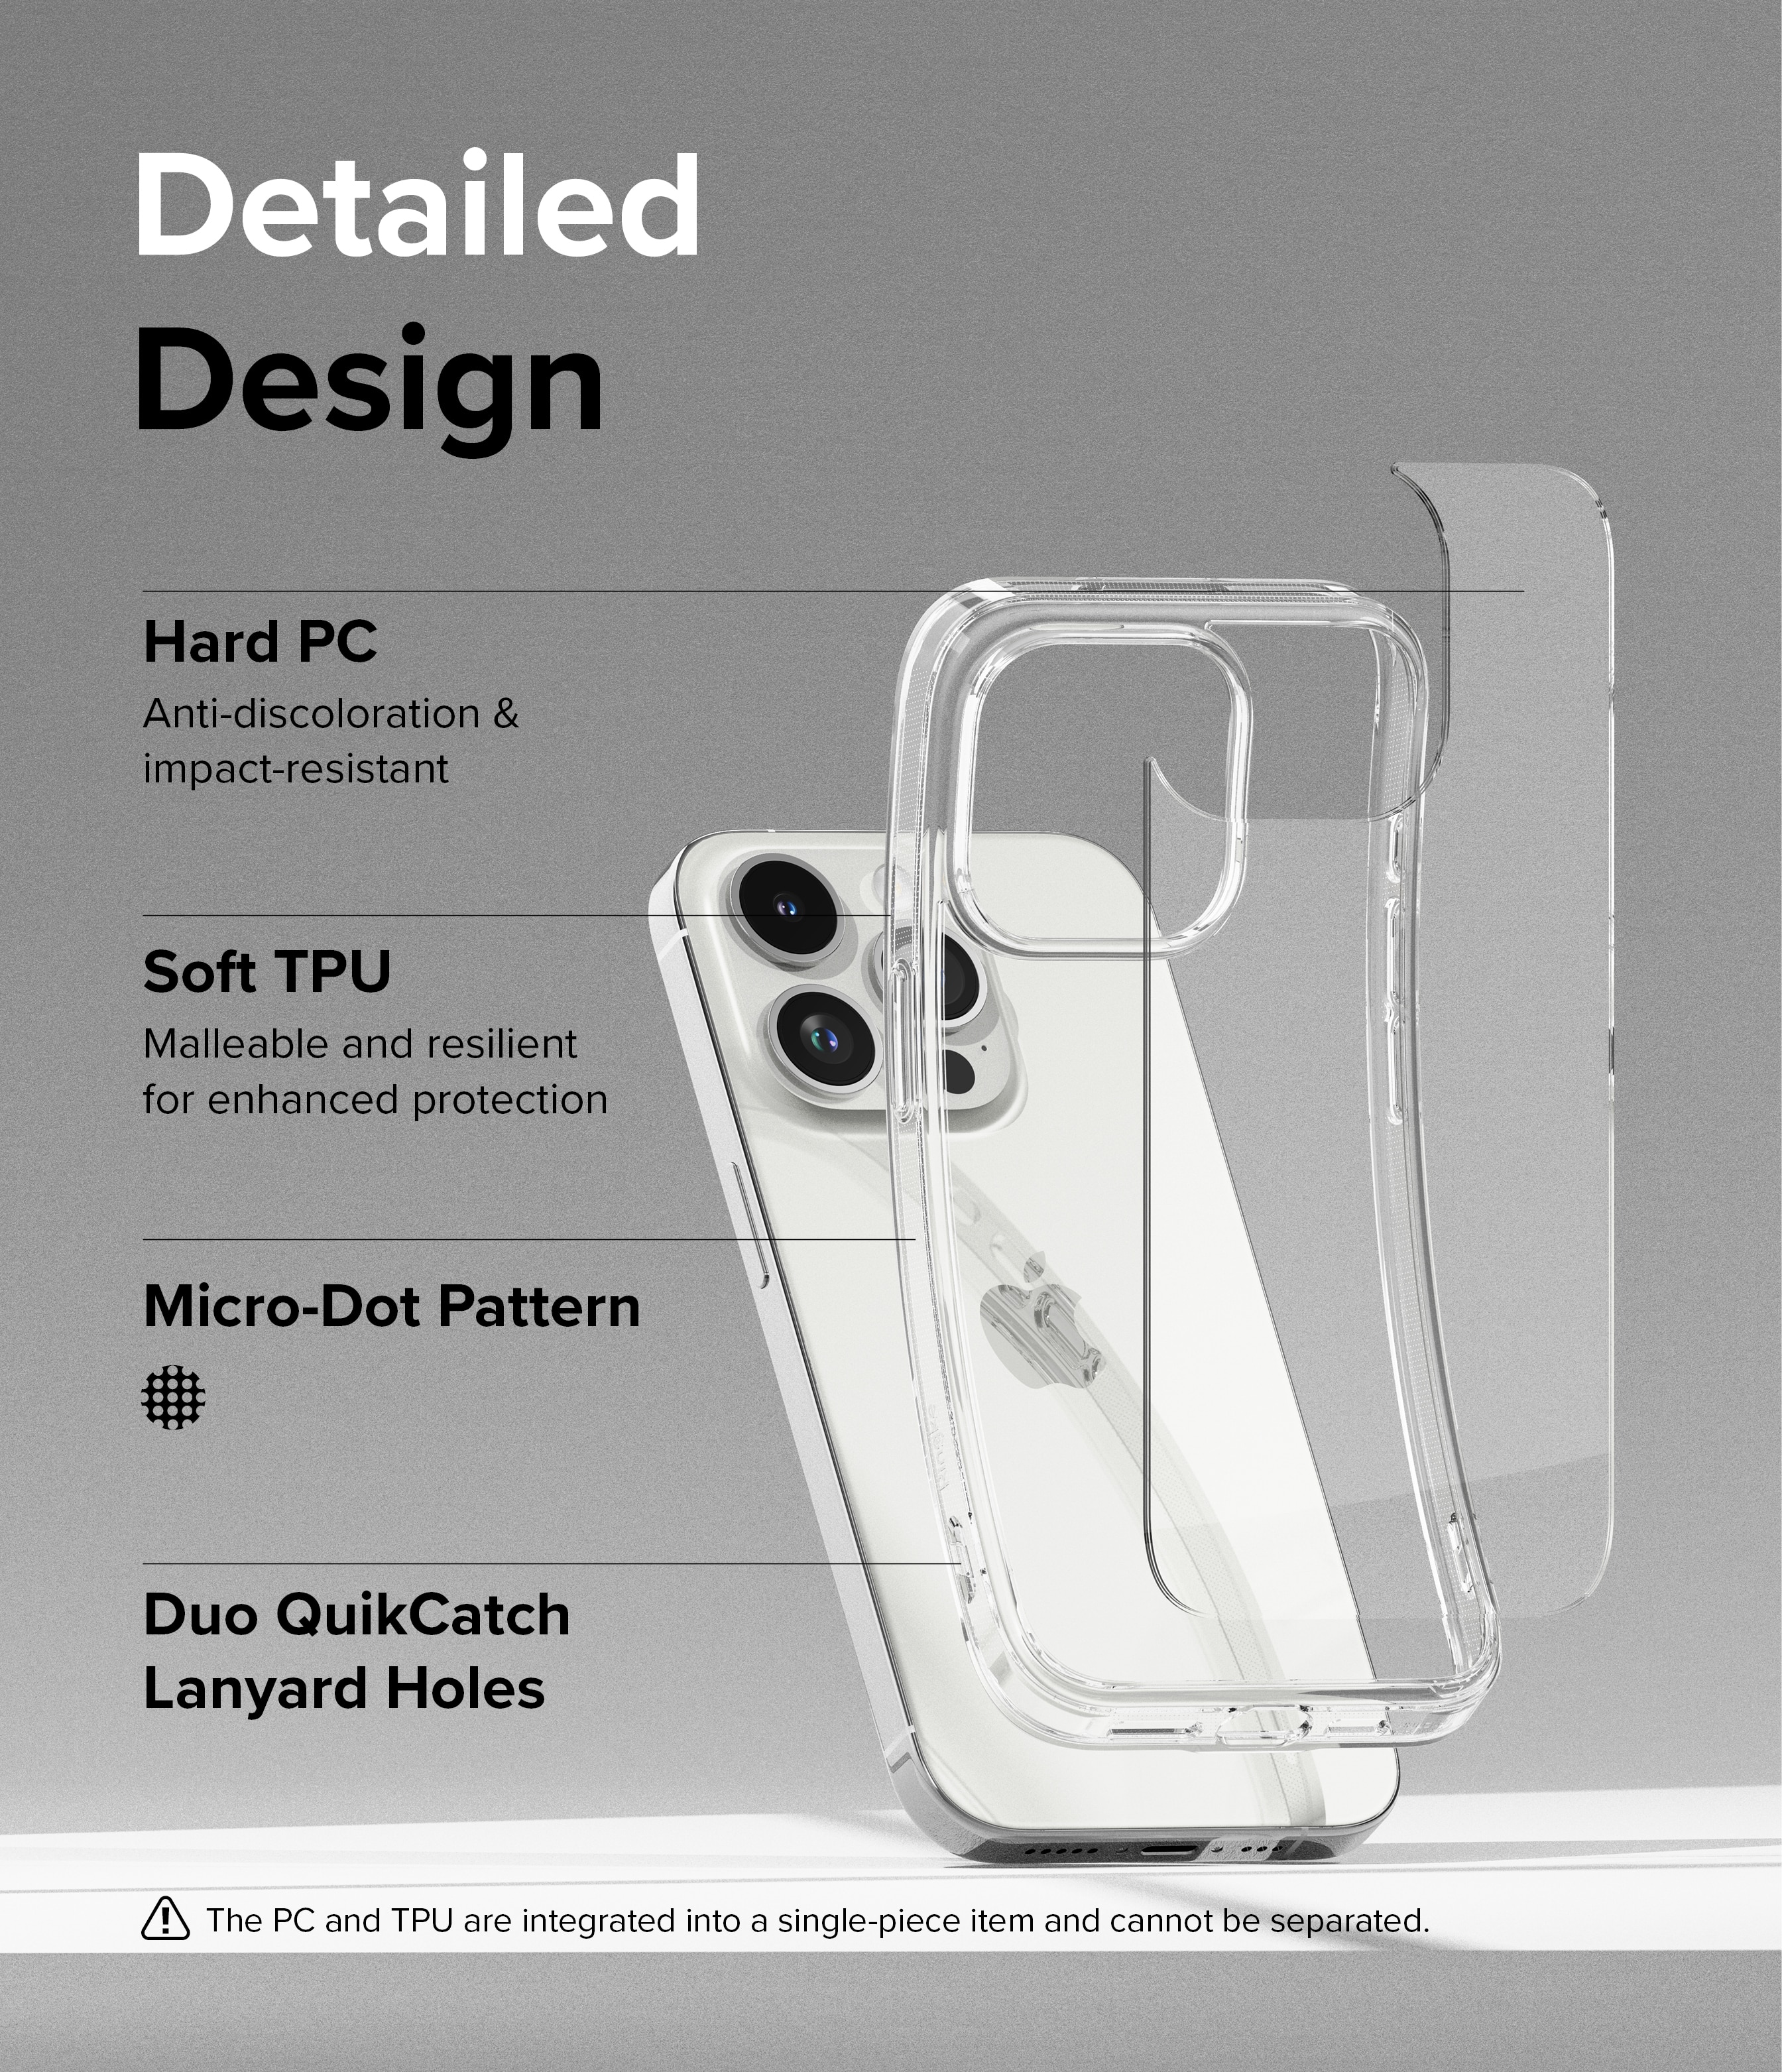 Cover Fusion iPhone 15 Pro Clear